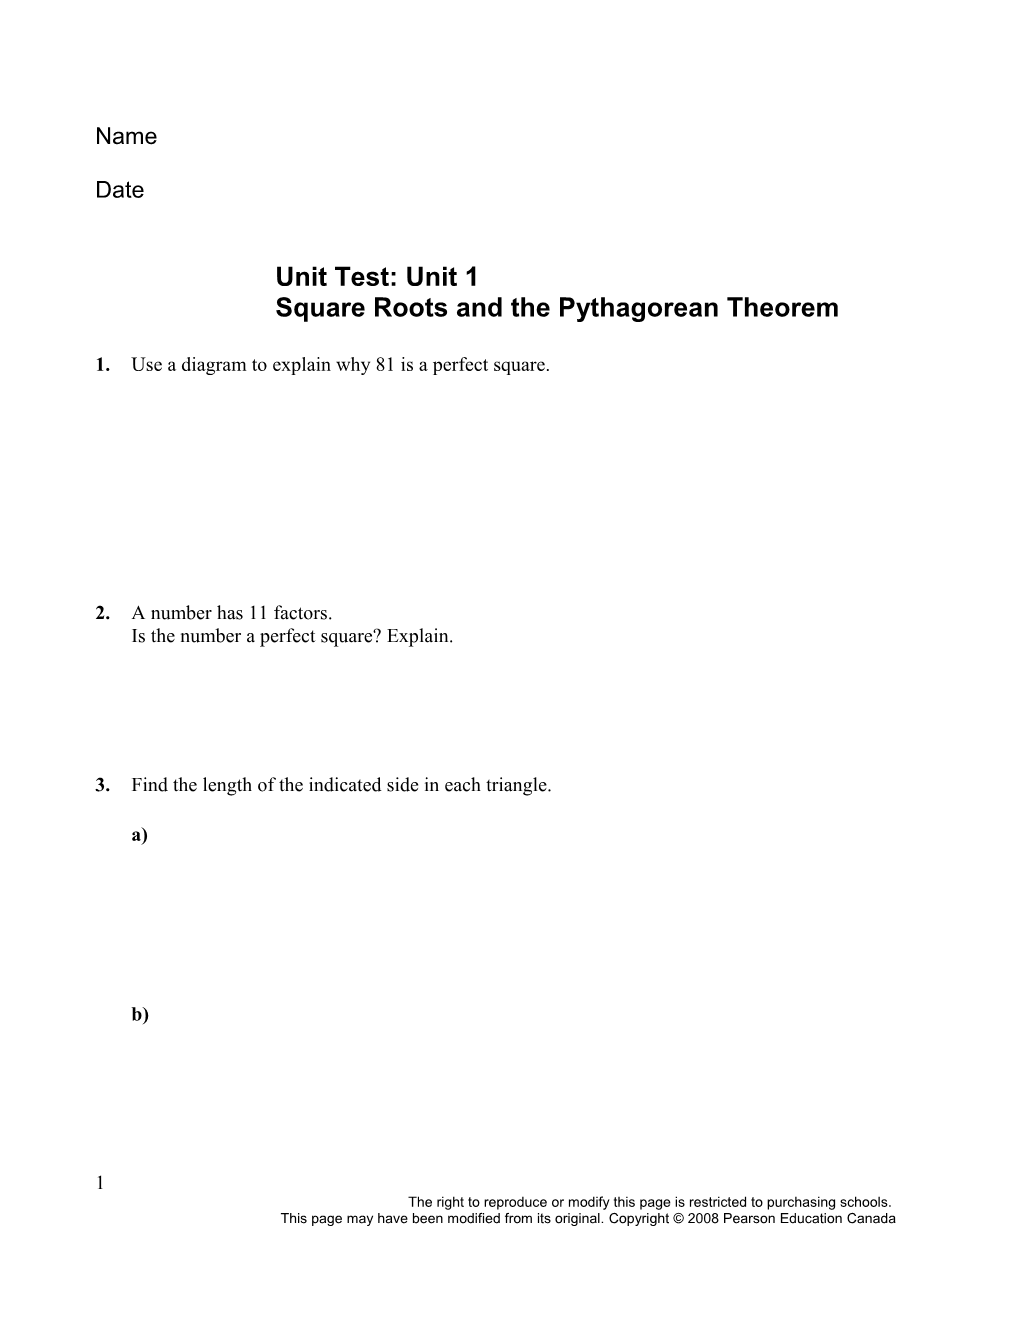 Unit Test: Unit 1 Square Roots and the Pythagorean Theorem